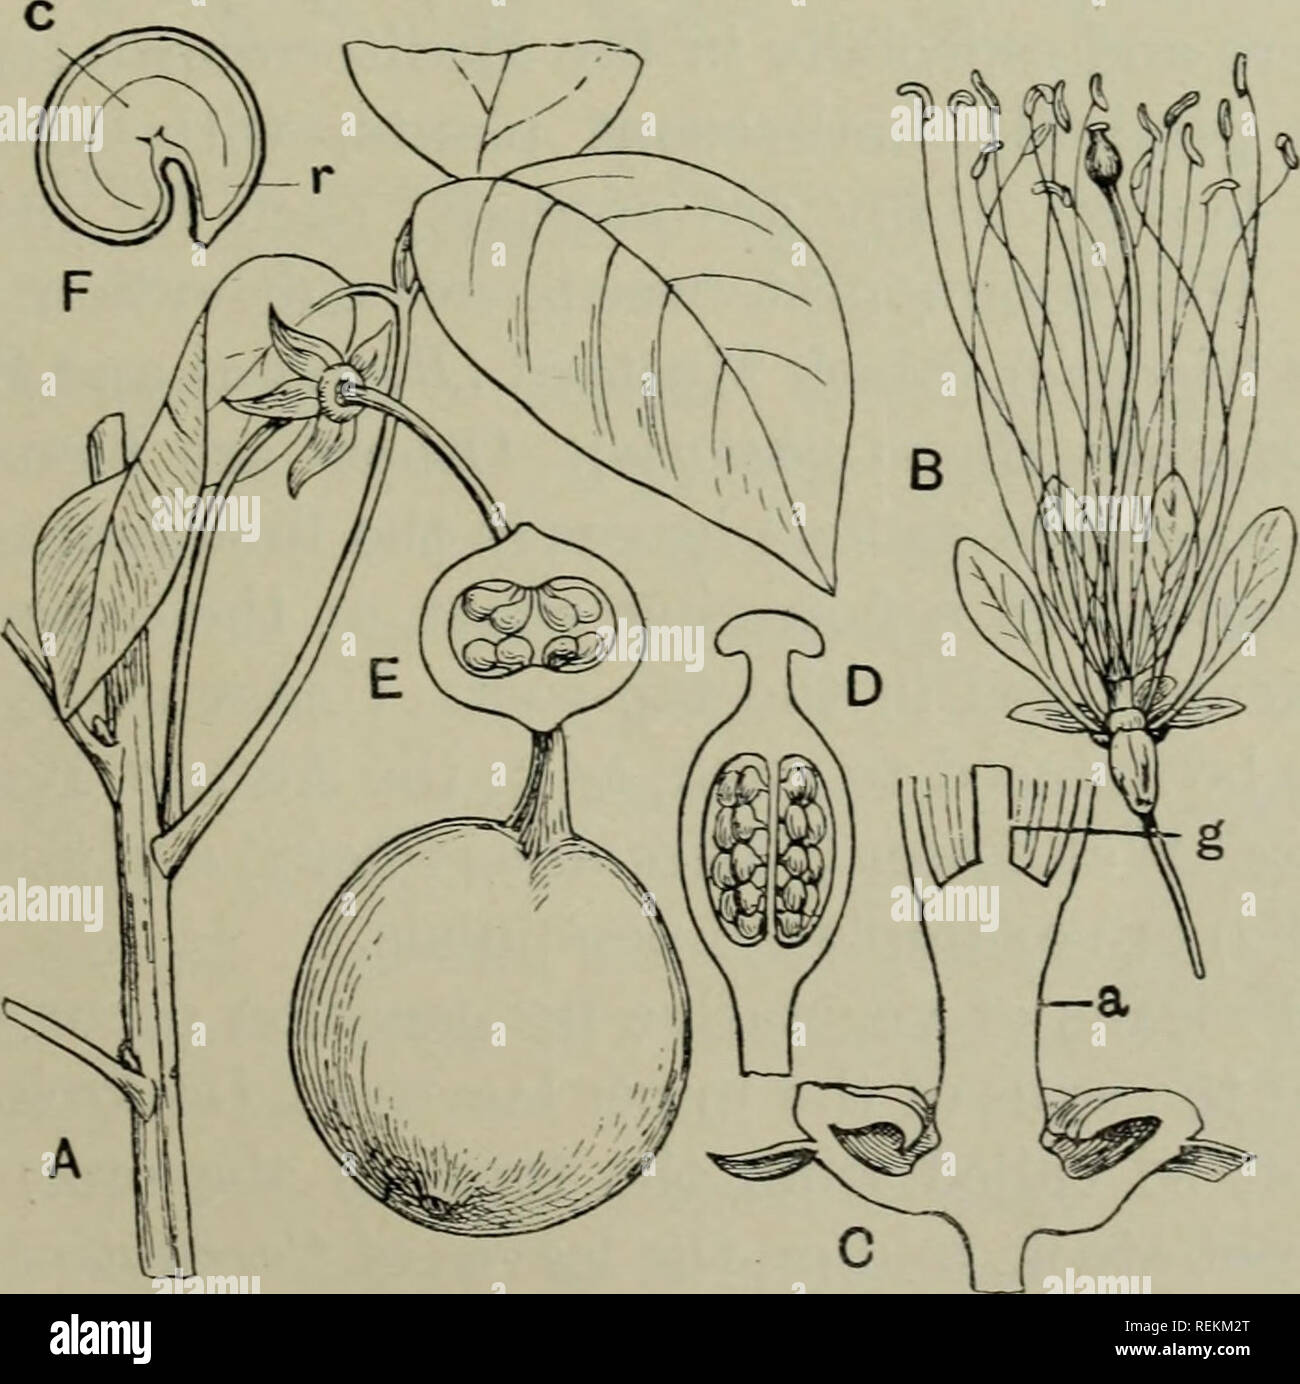 . The classification of flowering plants. Plants. Fig. 82. Polanisia viscosa. A. Portion of flowering branch, nat. size. B. Flower with sepals, petals and most of the stamens removed, x 2. C. Ripe fruit, nat. size. D. Seed, enlarged. (From Flor. Jam.). Fig. 83. Crataeva Tapia. A. Portion of branch shewing leaf and fruit, x f. B. Flower, X f. C. Receptacle cut lengthwise, x 5; a, androgjTiophore; g, gynopliore. D. Ovary cut lengthwise, x 5. E. Ovary cut across, x 6. F. Seed cut lengthwise, x 1^; c, cotyledons; r, radicle. (From Flor. Jam.). Please note that these images are extracted from scann Stock Photo